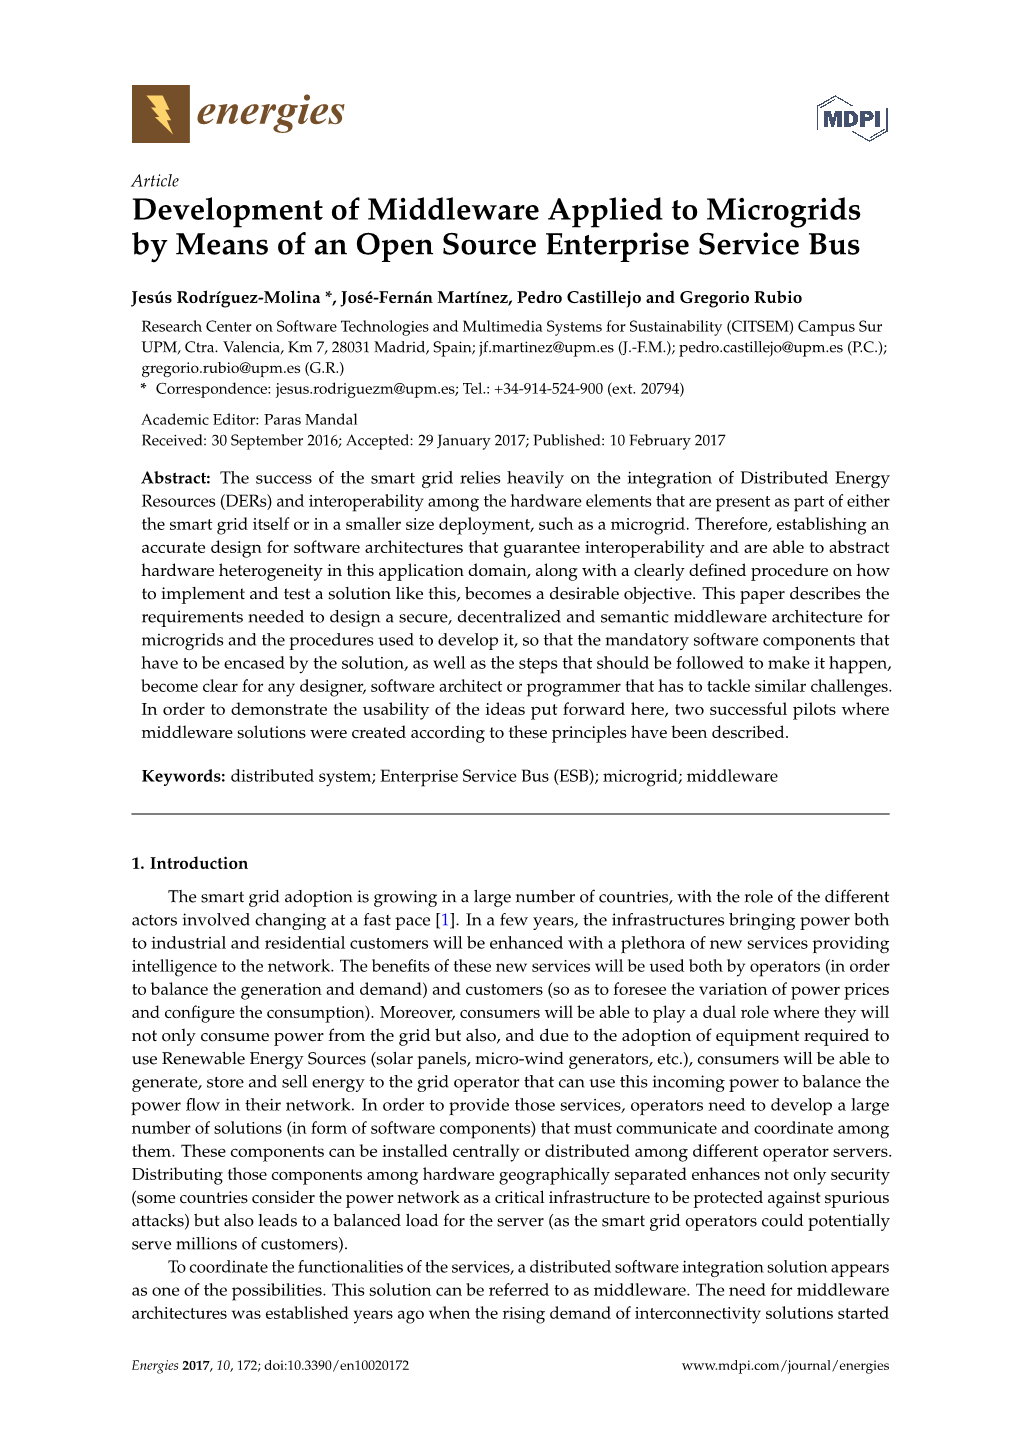 Development of Middleware Applied to Microgrids by Means of an Open Source Enterprise Service Bus